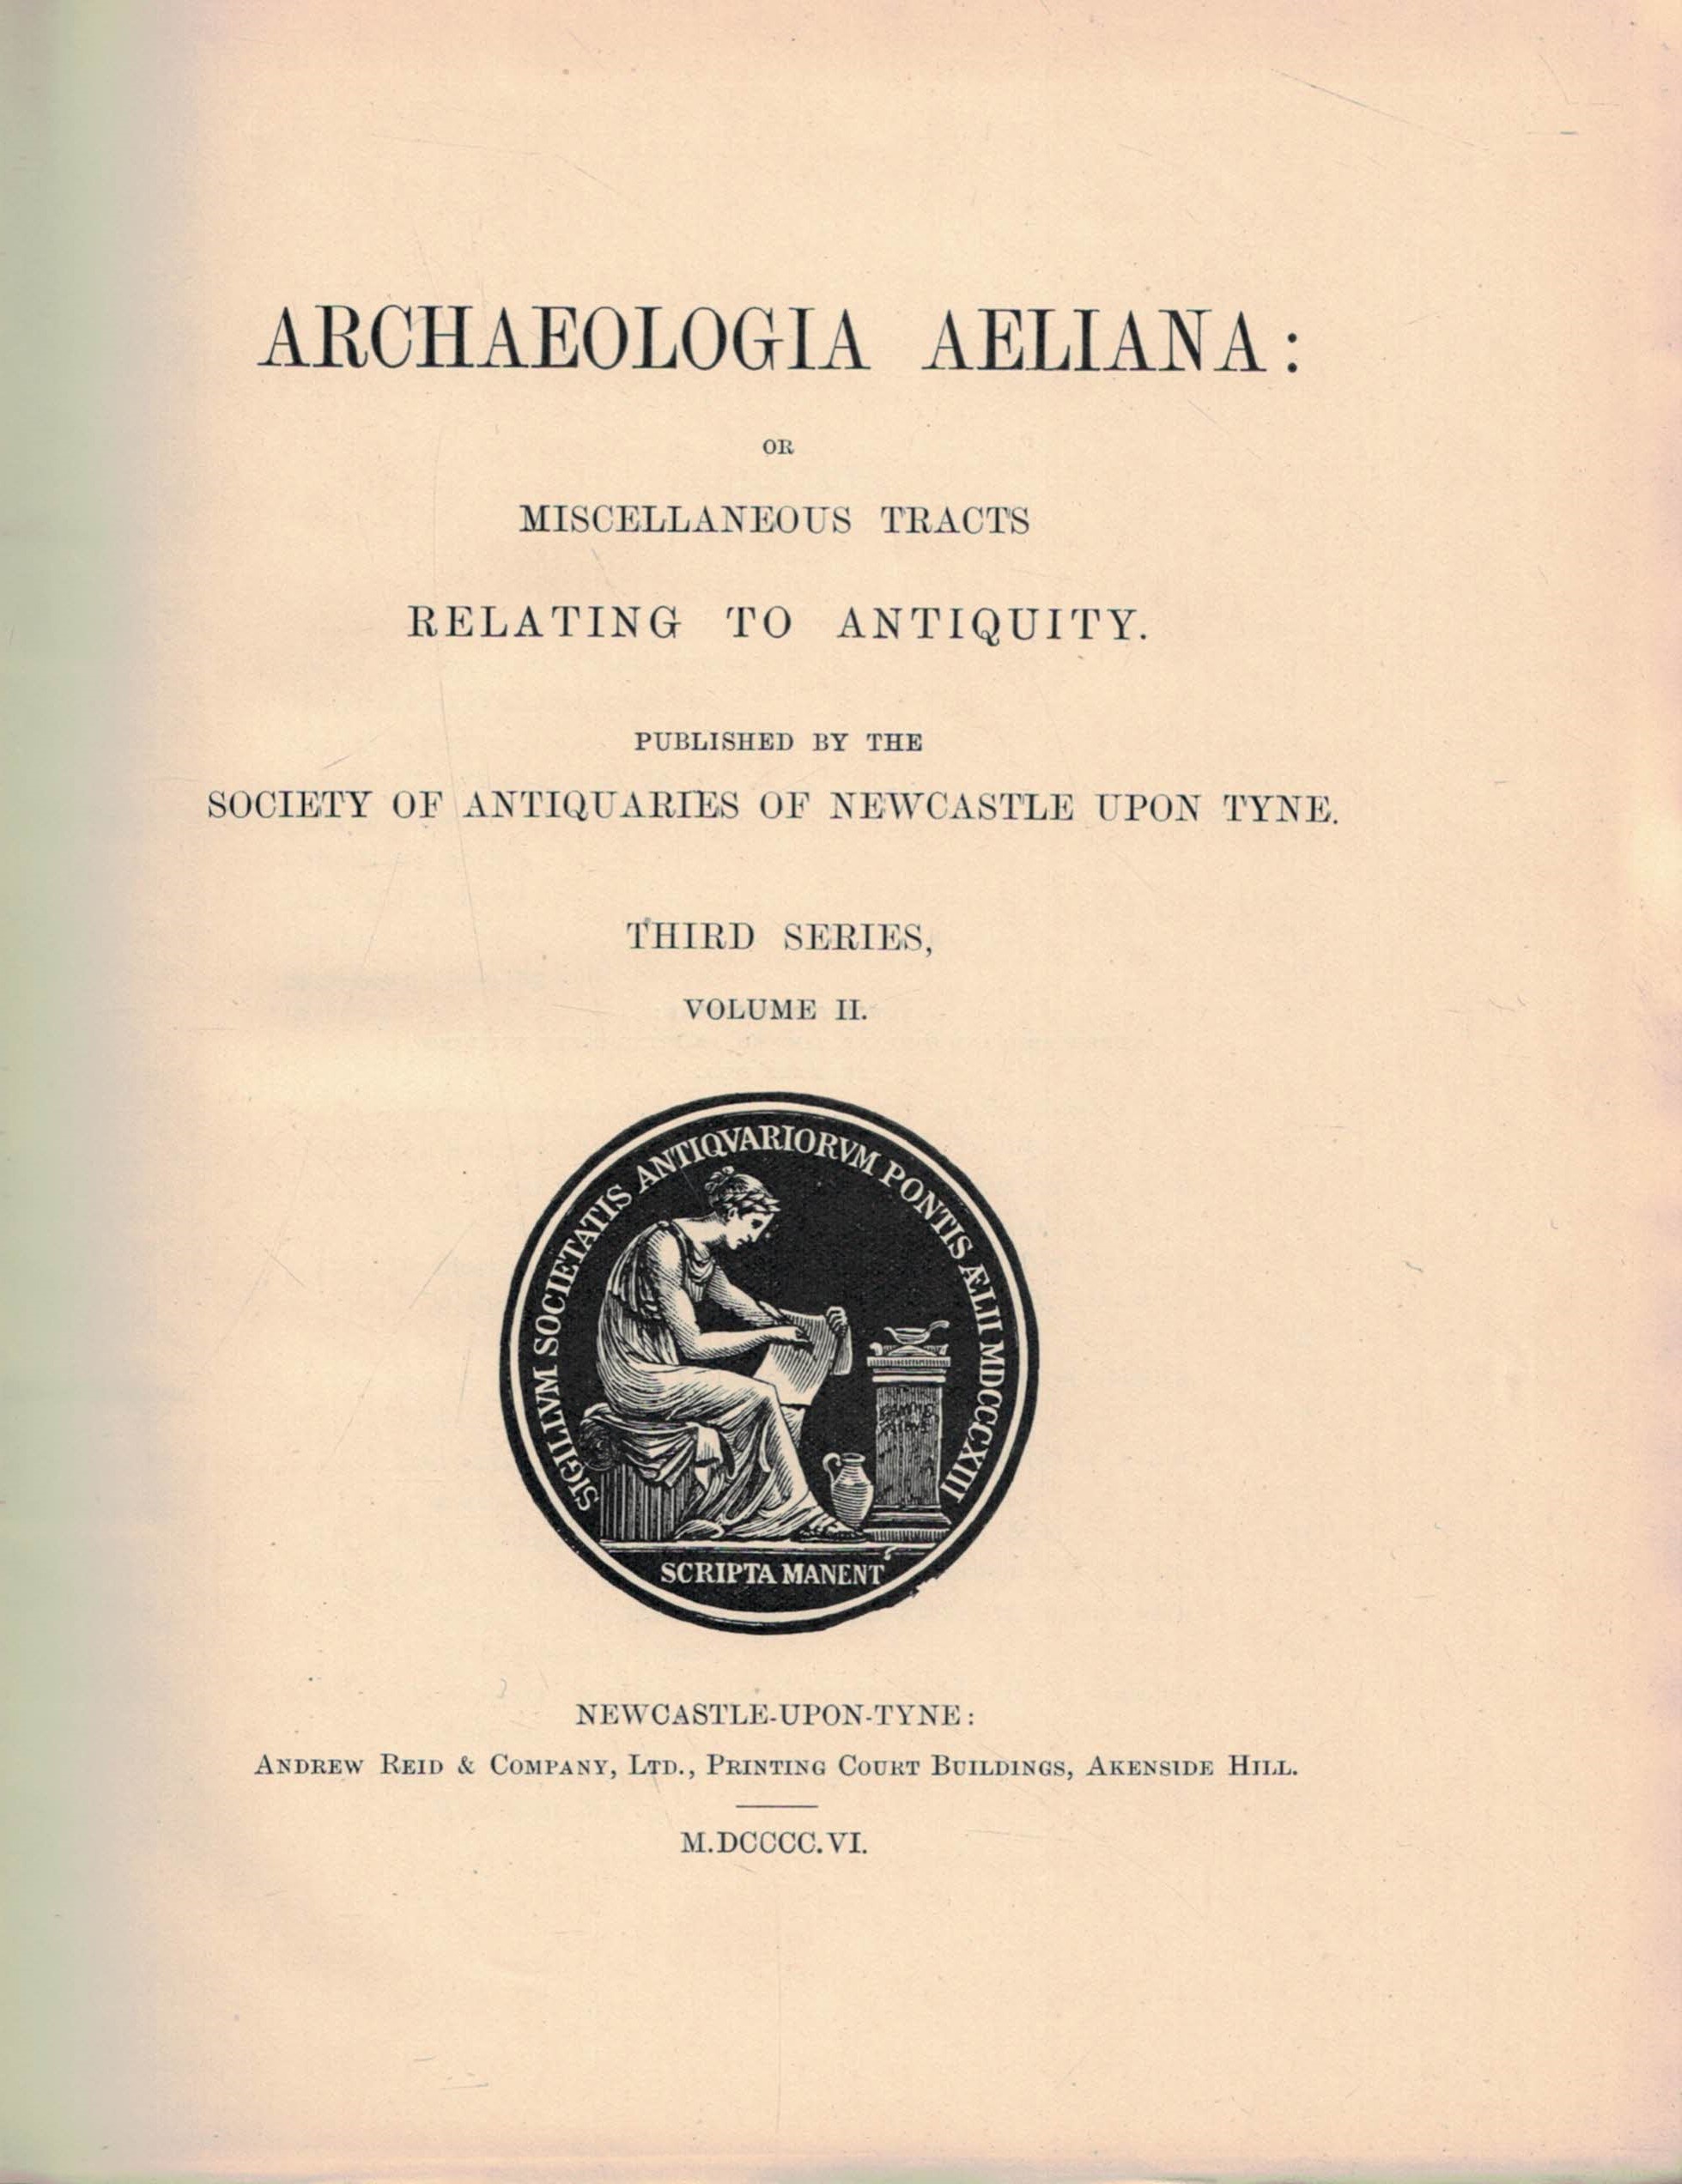 Archaeologia Aeliana: or, Miscellaneous Tracts Relating to Antiquities. 3rd series, Volume II [2]. 1906.